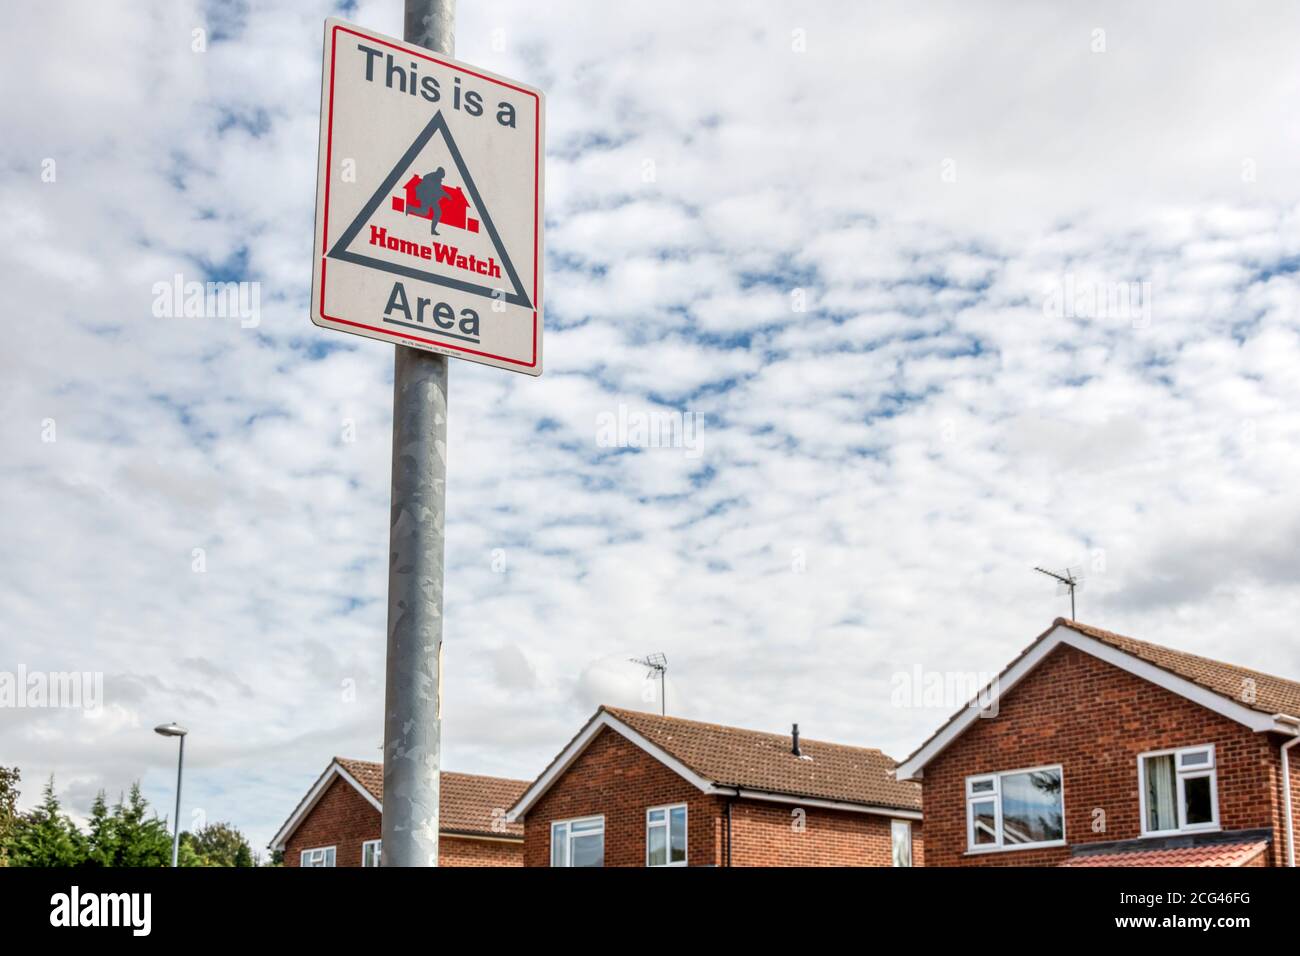 This is a HomeWatch area sign in a residential street. Stock Photo